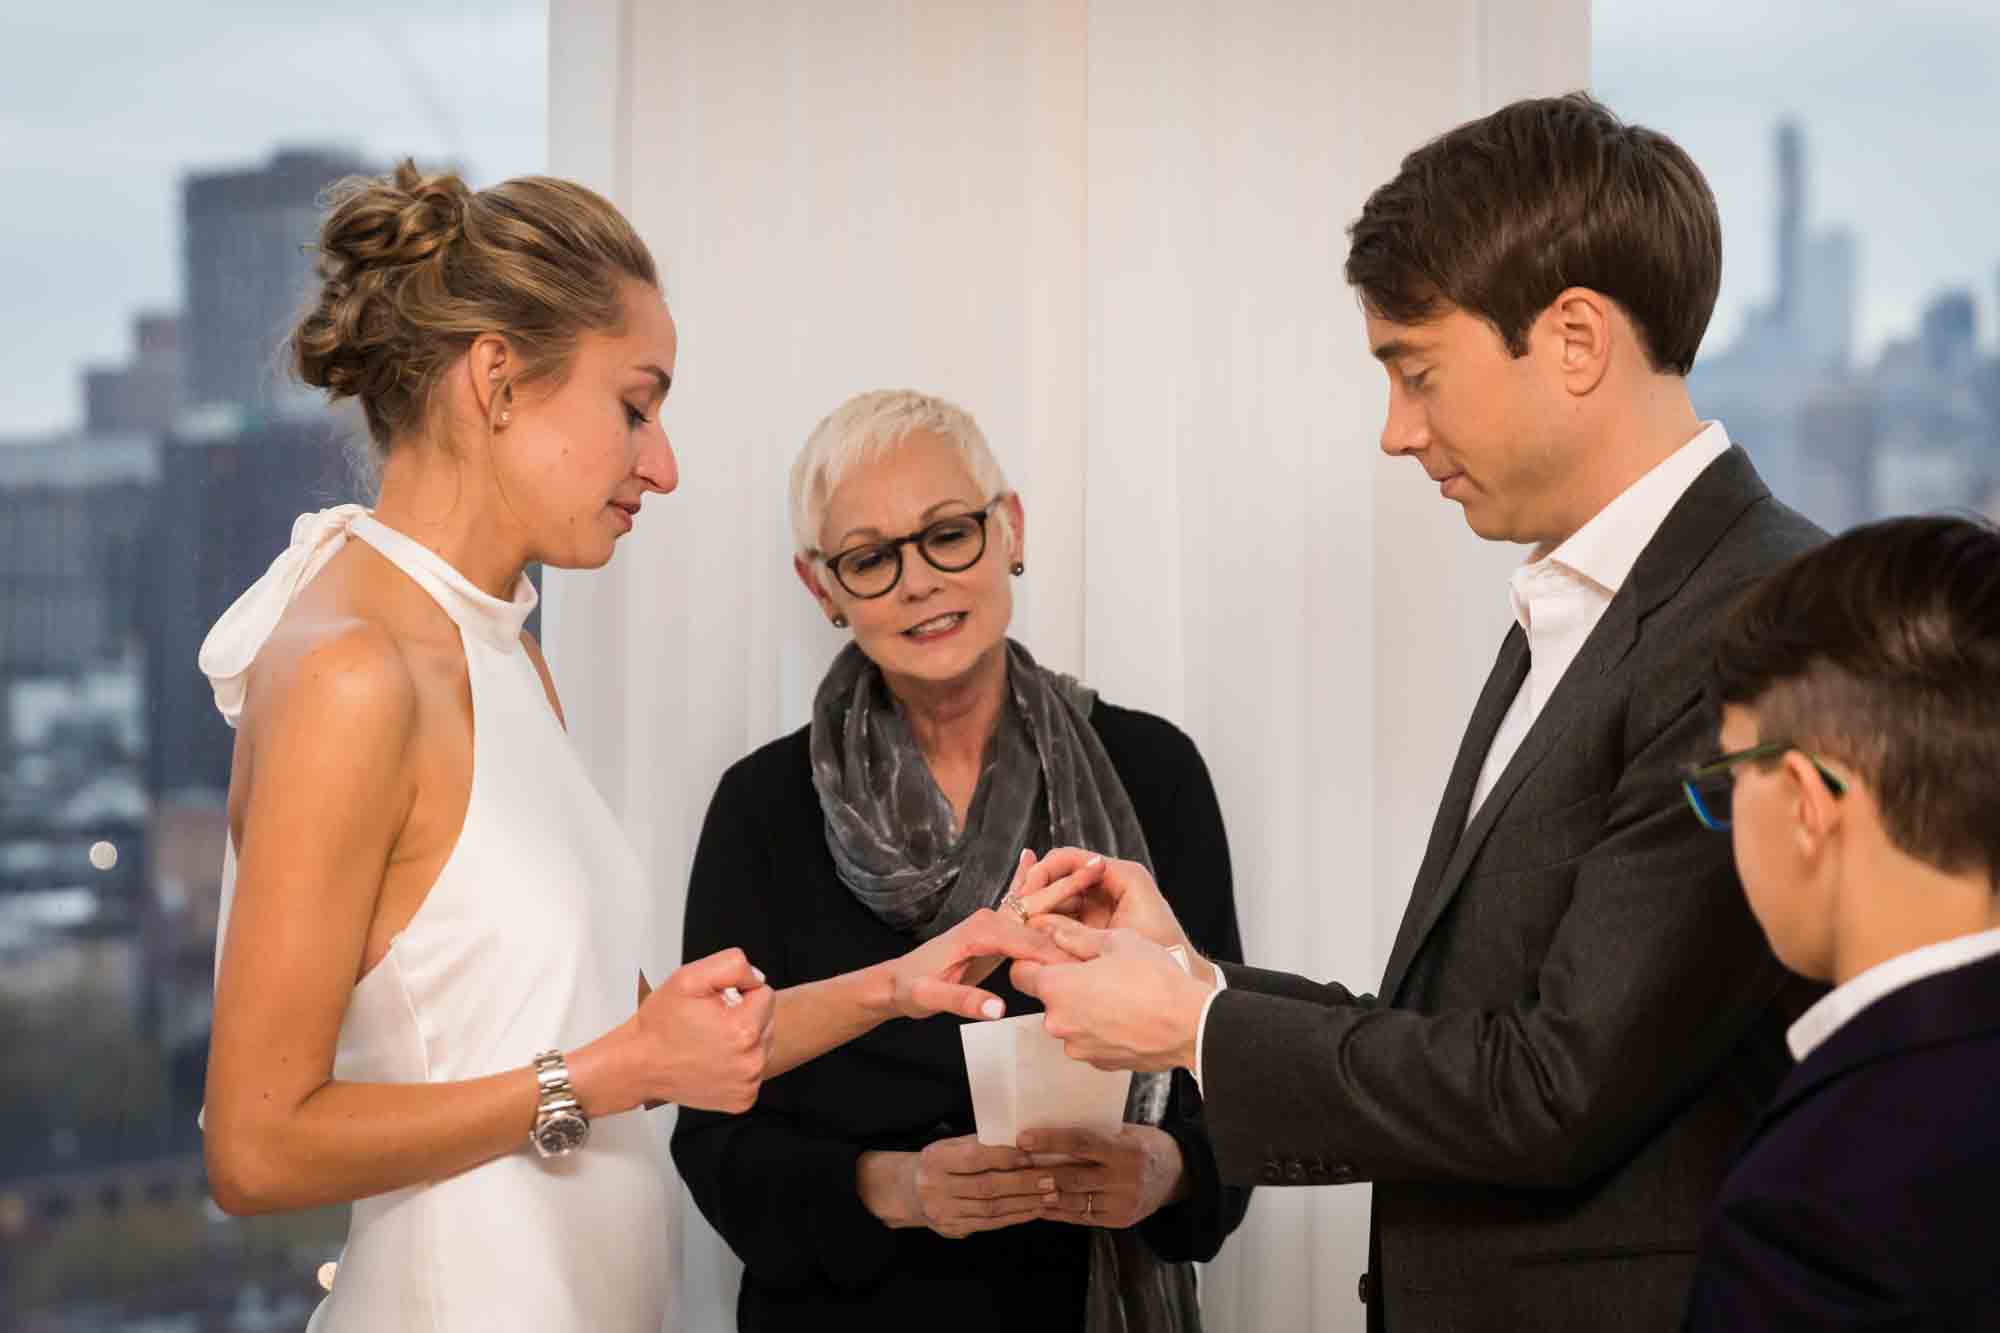 Officiant watching as groom puts ring on bride's finger